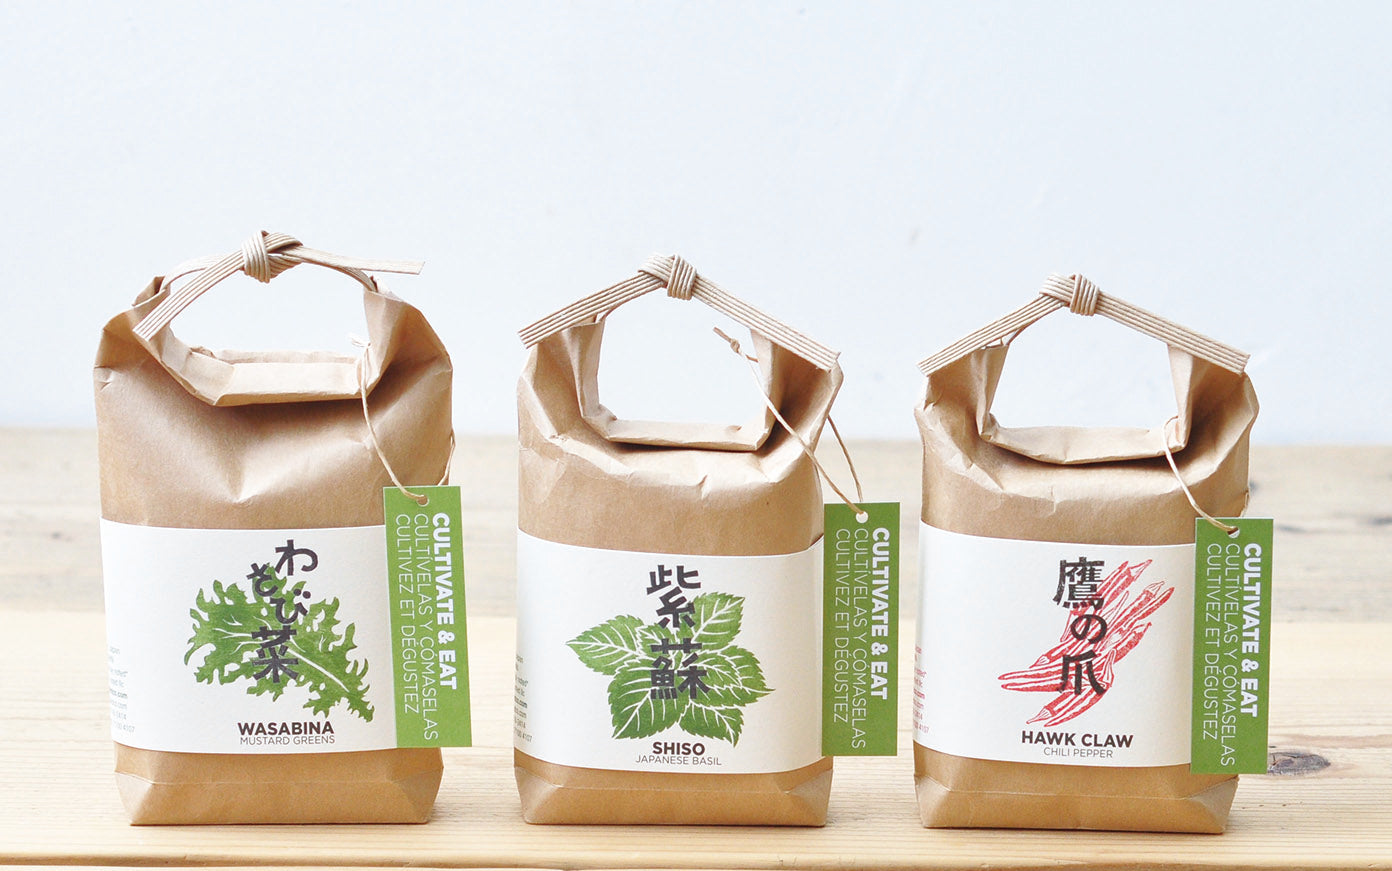 Grow Your Own Japanese Herb Kit in Japanese Paper Bag - Shiso